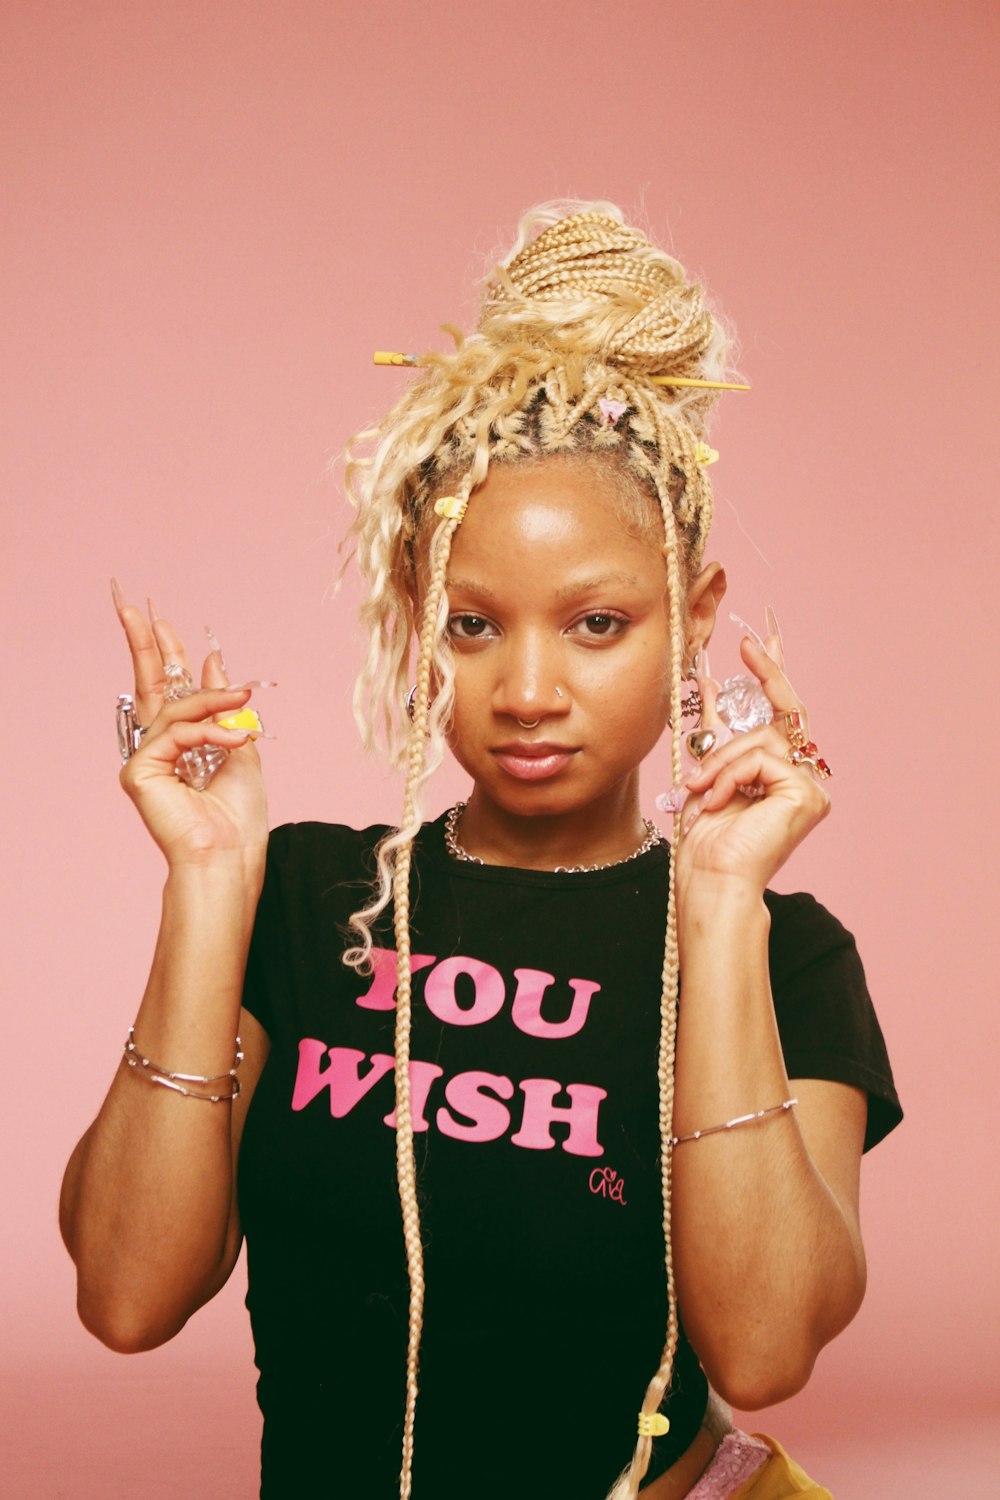 a woman with blonde dreadlocks and a black shirt